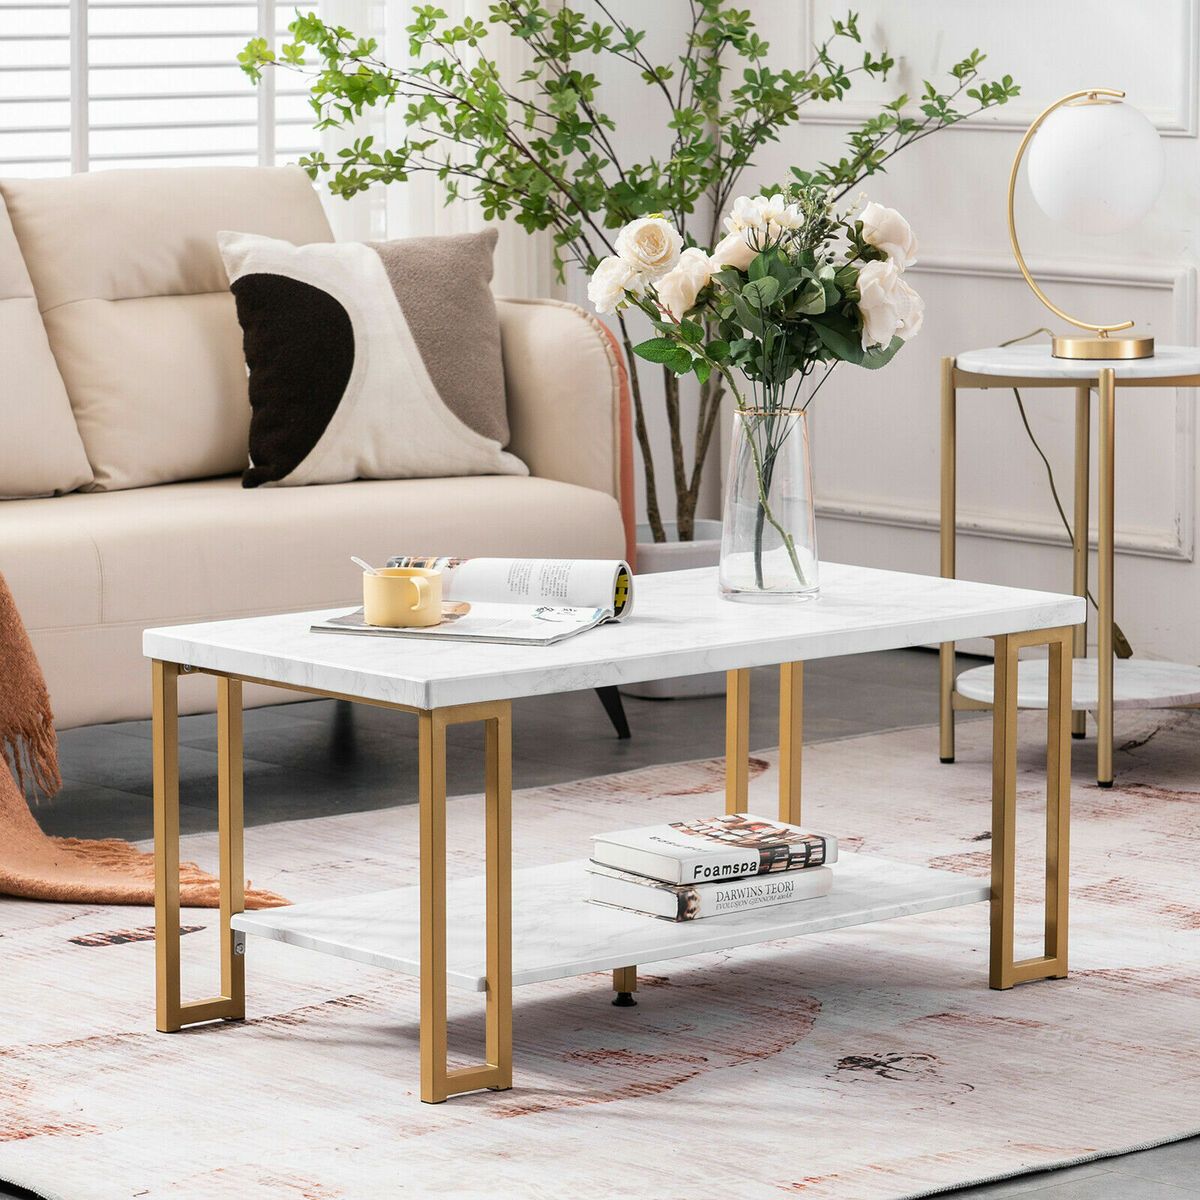 Us Living Room Rectangle Coffee Table W/ White Faux Marble Top &gold Base  Shelf | Ebay In Rectangular Coffee Tables With Pedestal Bases (Photo 6 of 15)